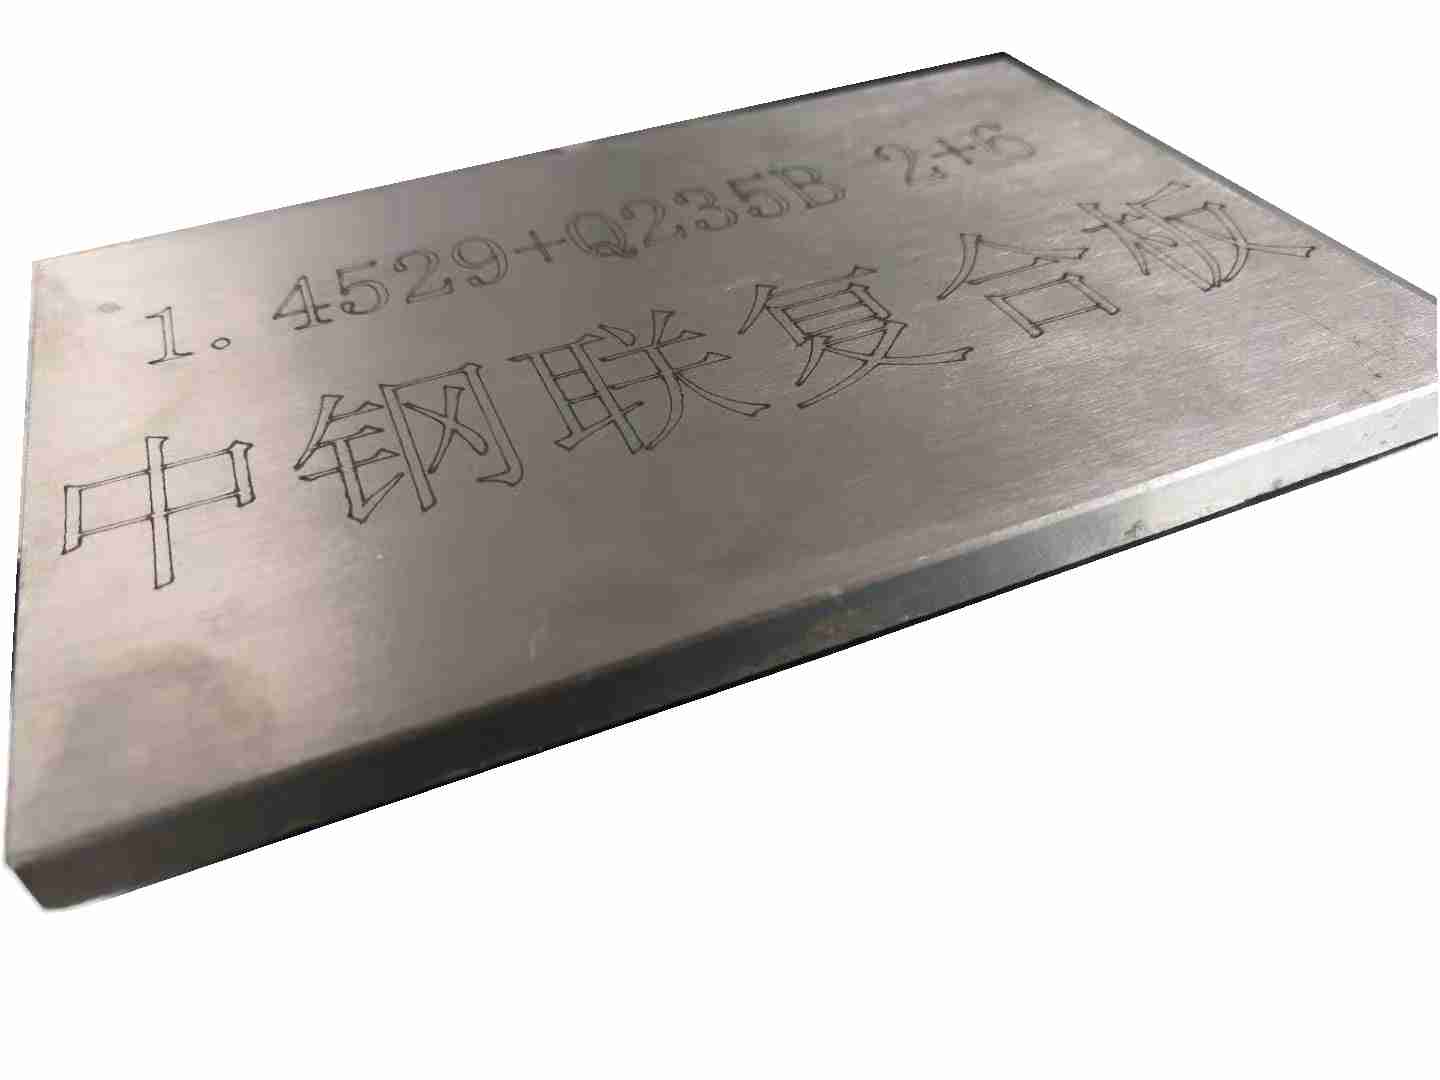 1. 4529 Stainless Clad Steel Plate